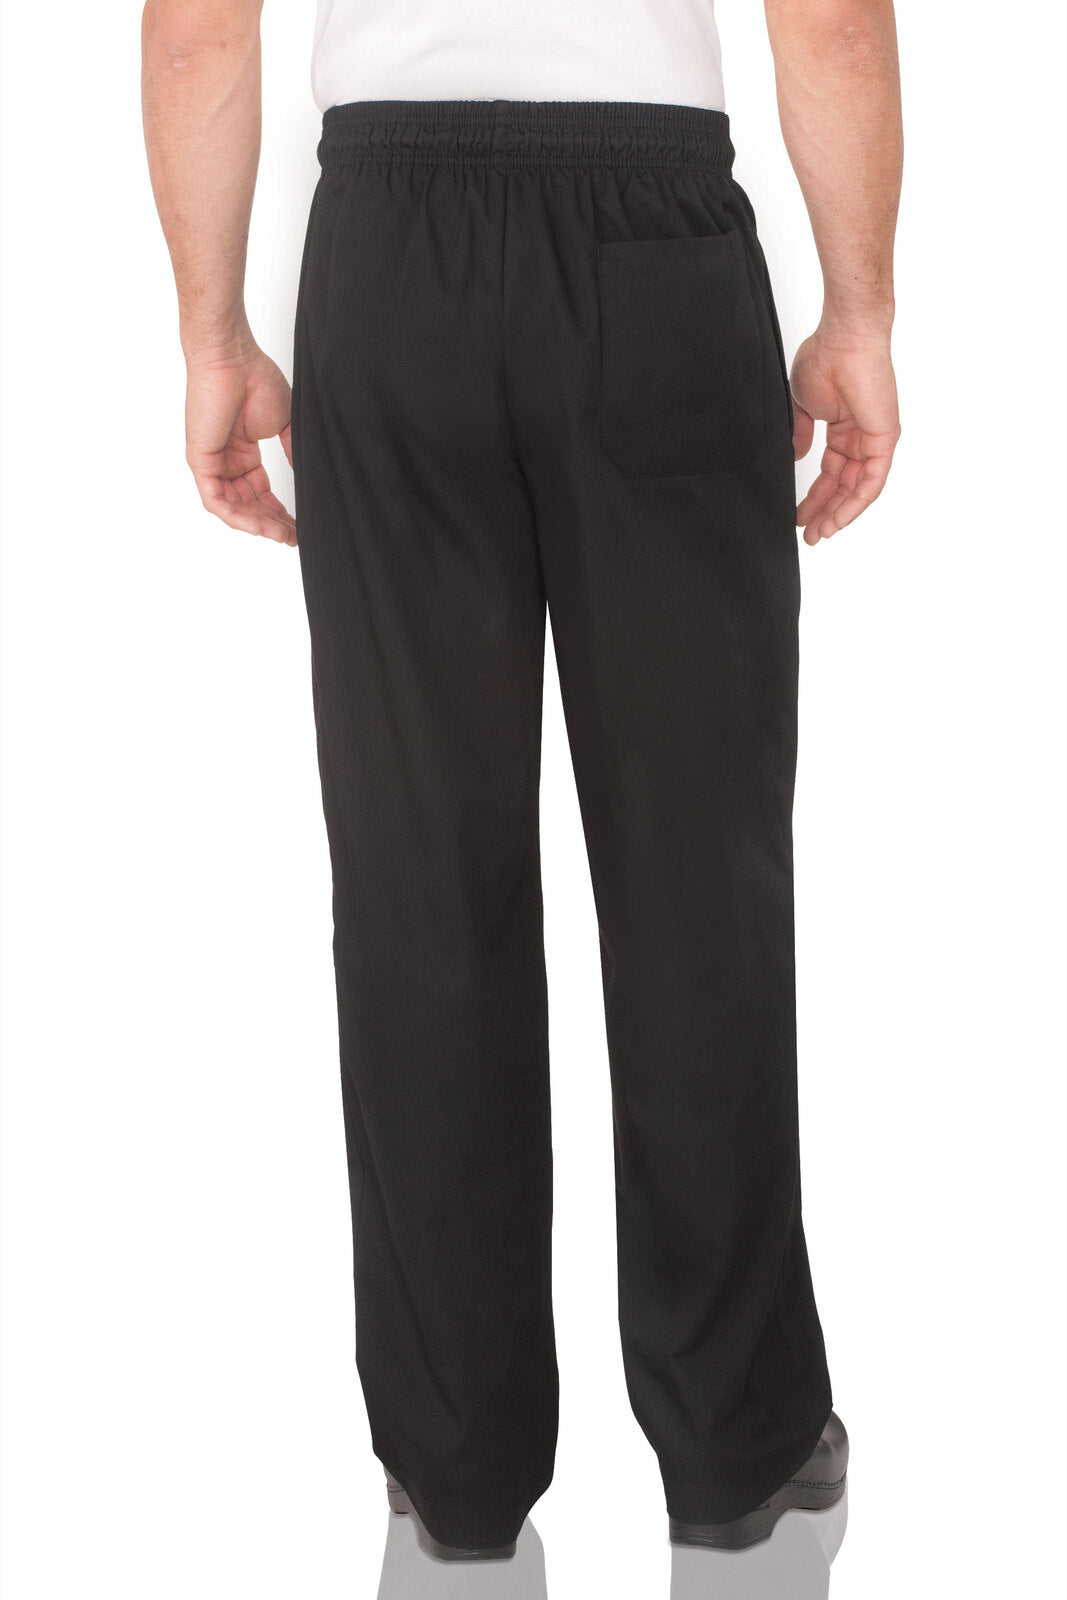 Chef Works Essential Baggy Chef Pants -(NBBP)